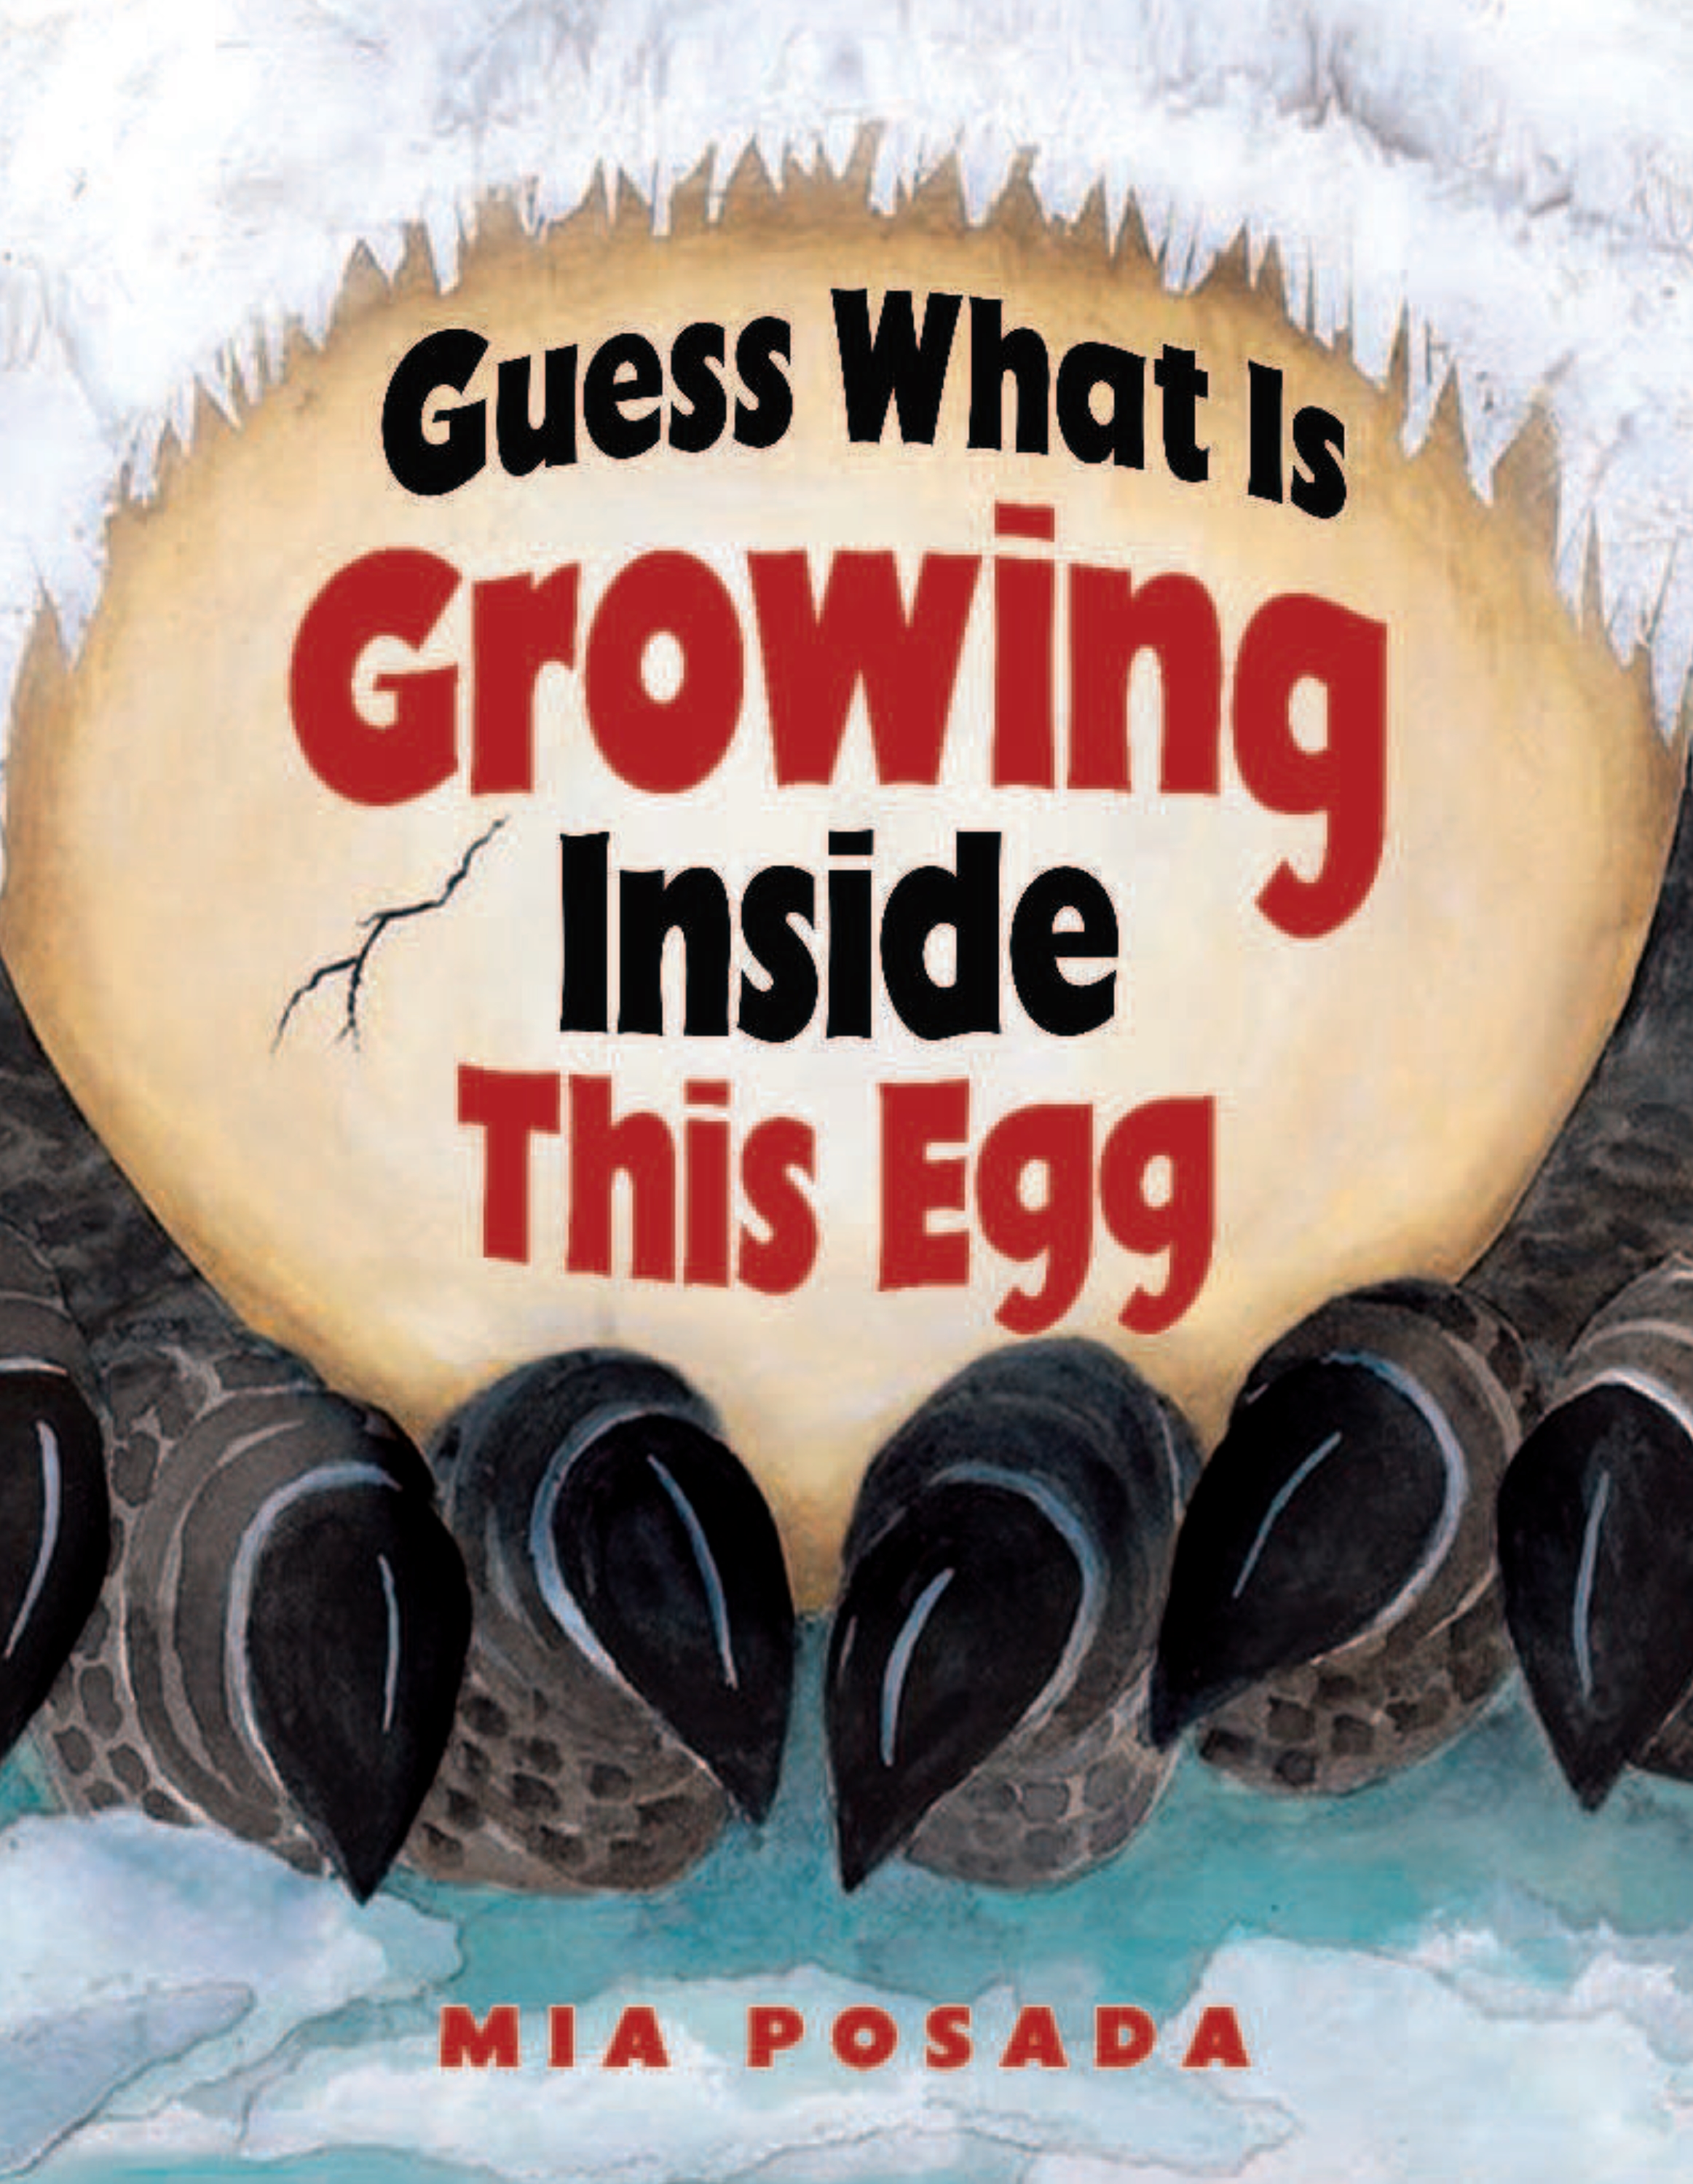 Guess What is Growing inside the Egg